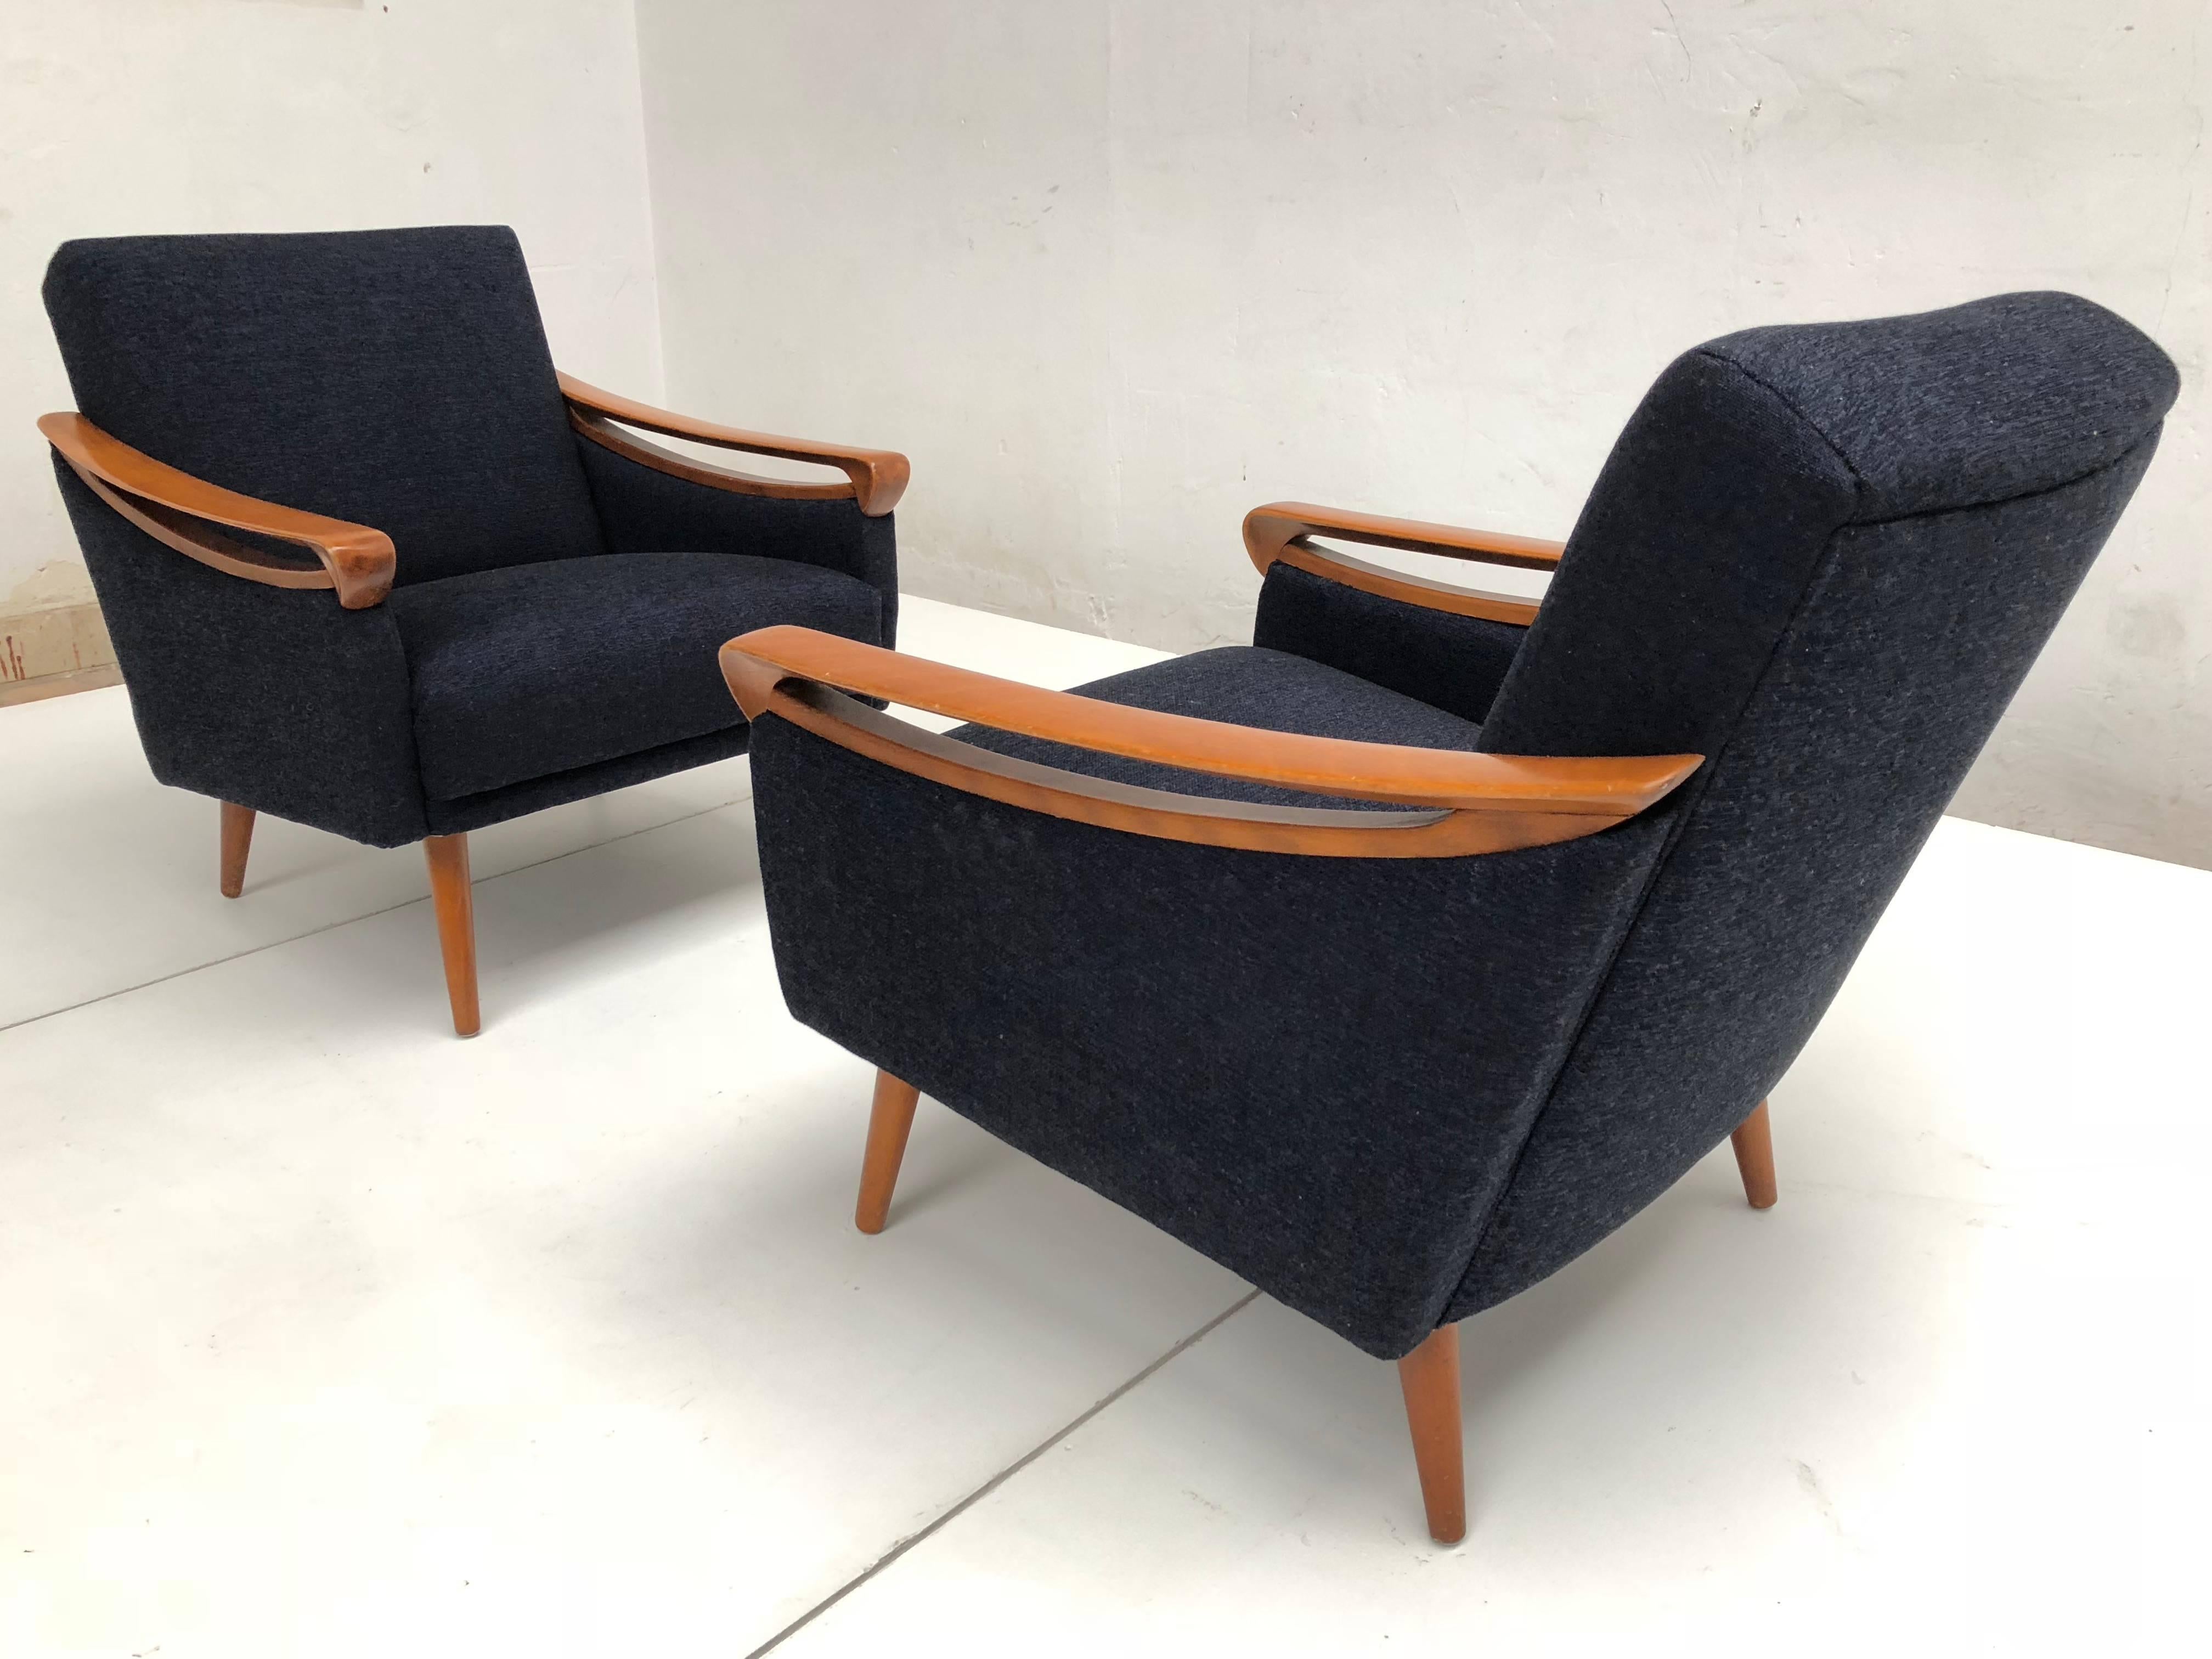 Great pair of New Upholstered Mid-Century Modern armchairs by Lifa West Germany

High quality German manufacturing from the 1960s

We upholstered these chairs with a stunning midnight blue and black melange De Ploeg 'Steppe' Wool